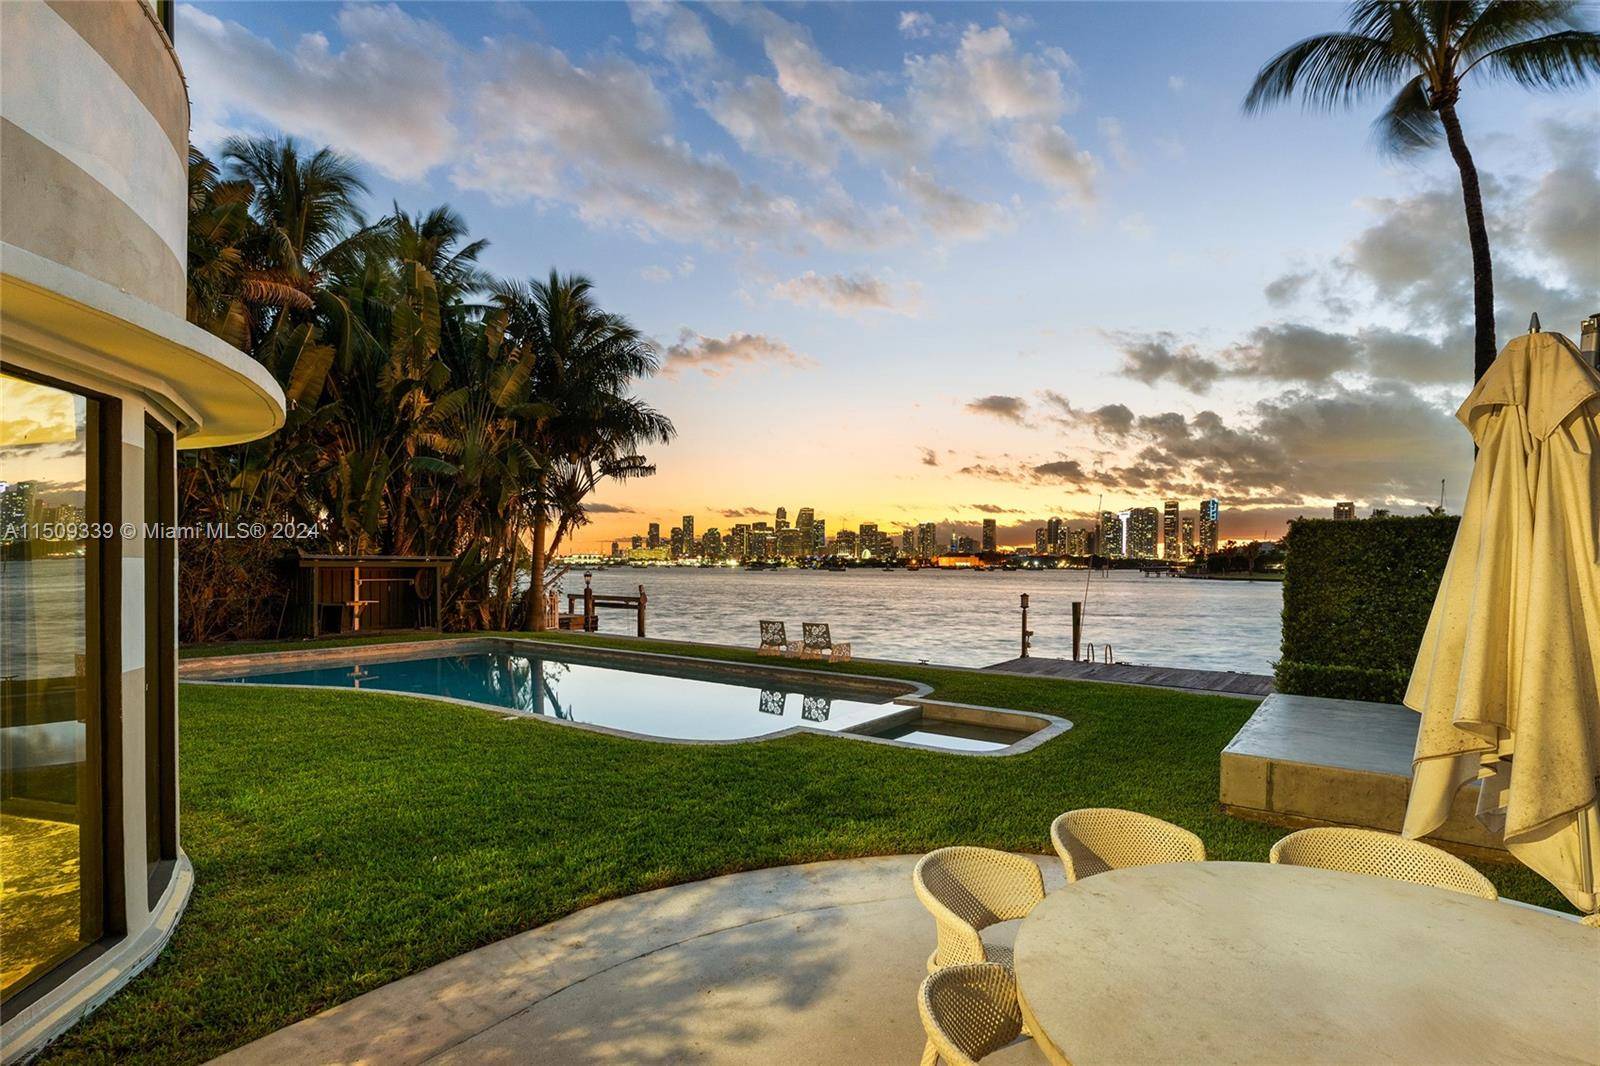 An amazing opportunity to develop a beautiful new estate with open Biscayne Bay downtown sunset views or renovate the existing 4BR 5 1 BA Art Deco bayfront home situated on ...